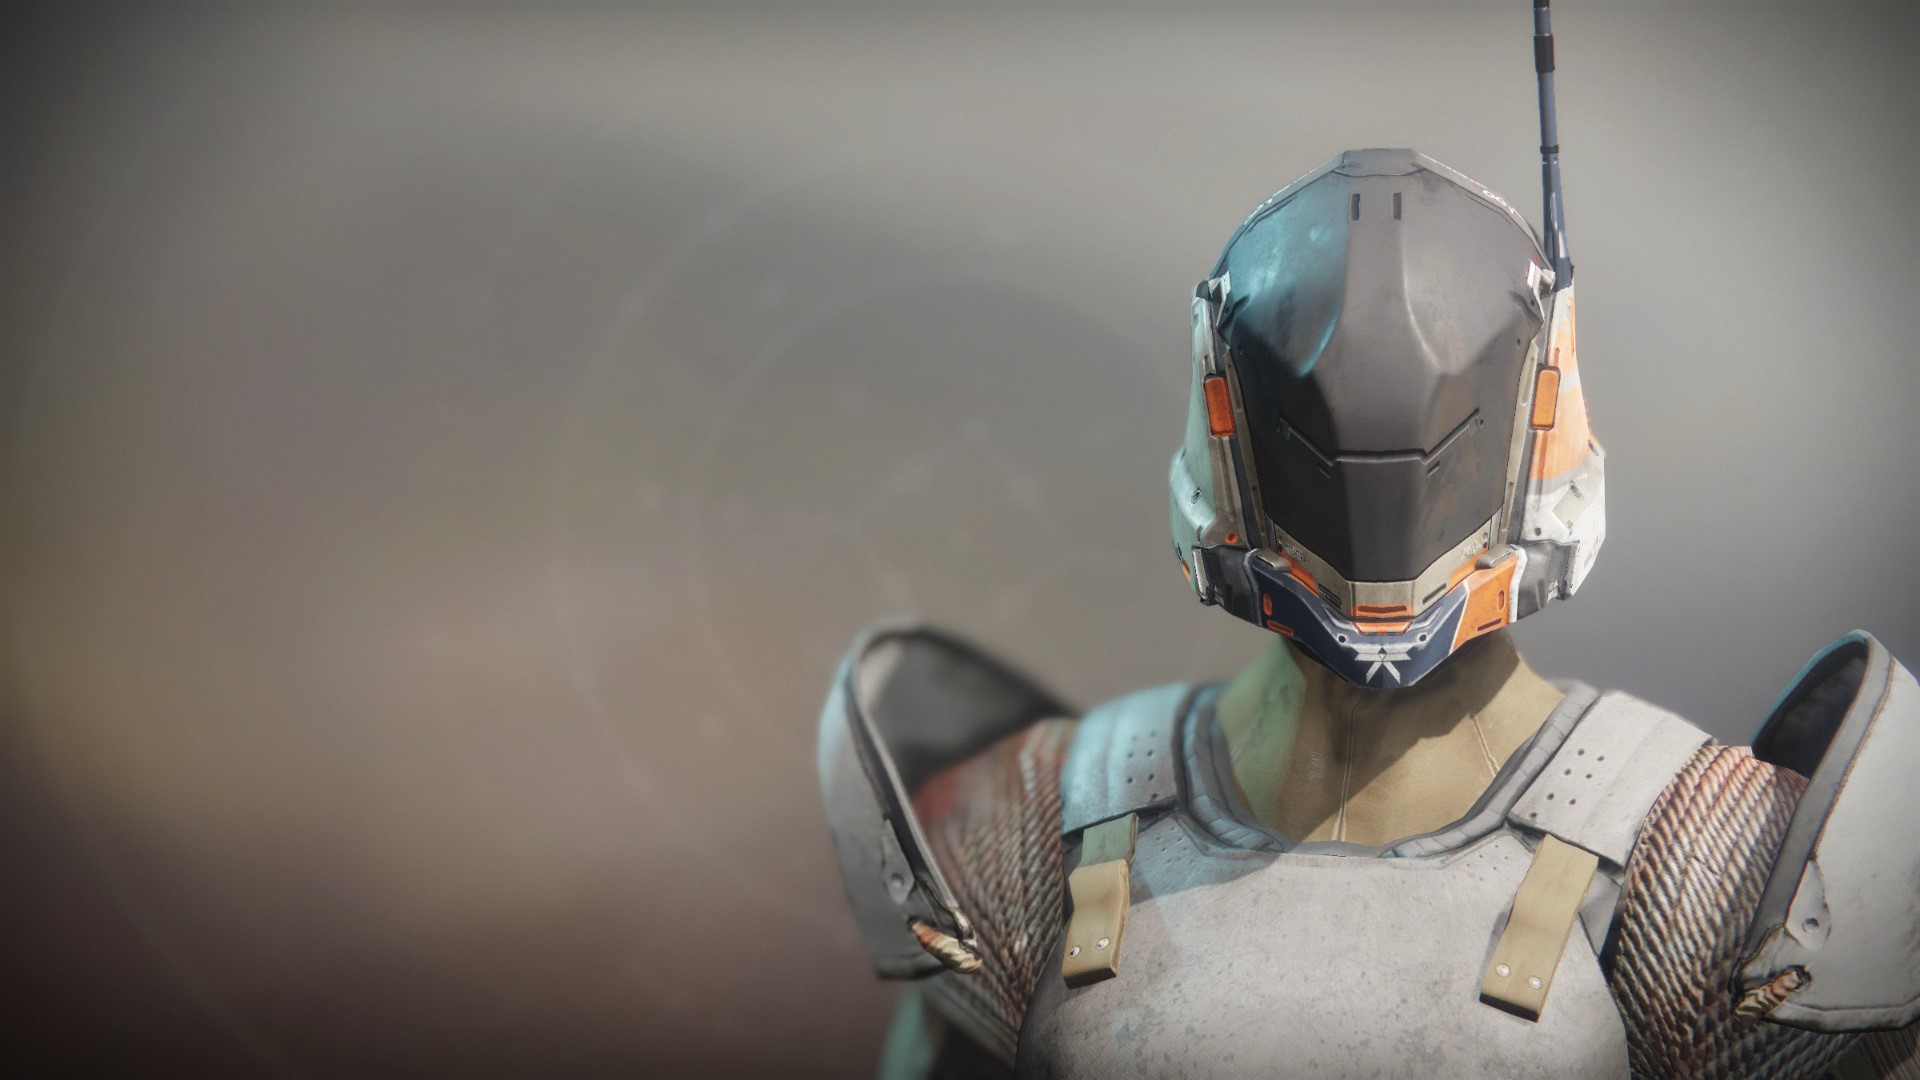 An in-game render of the Take Shelter Ornament.